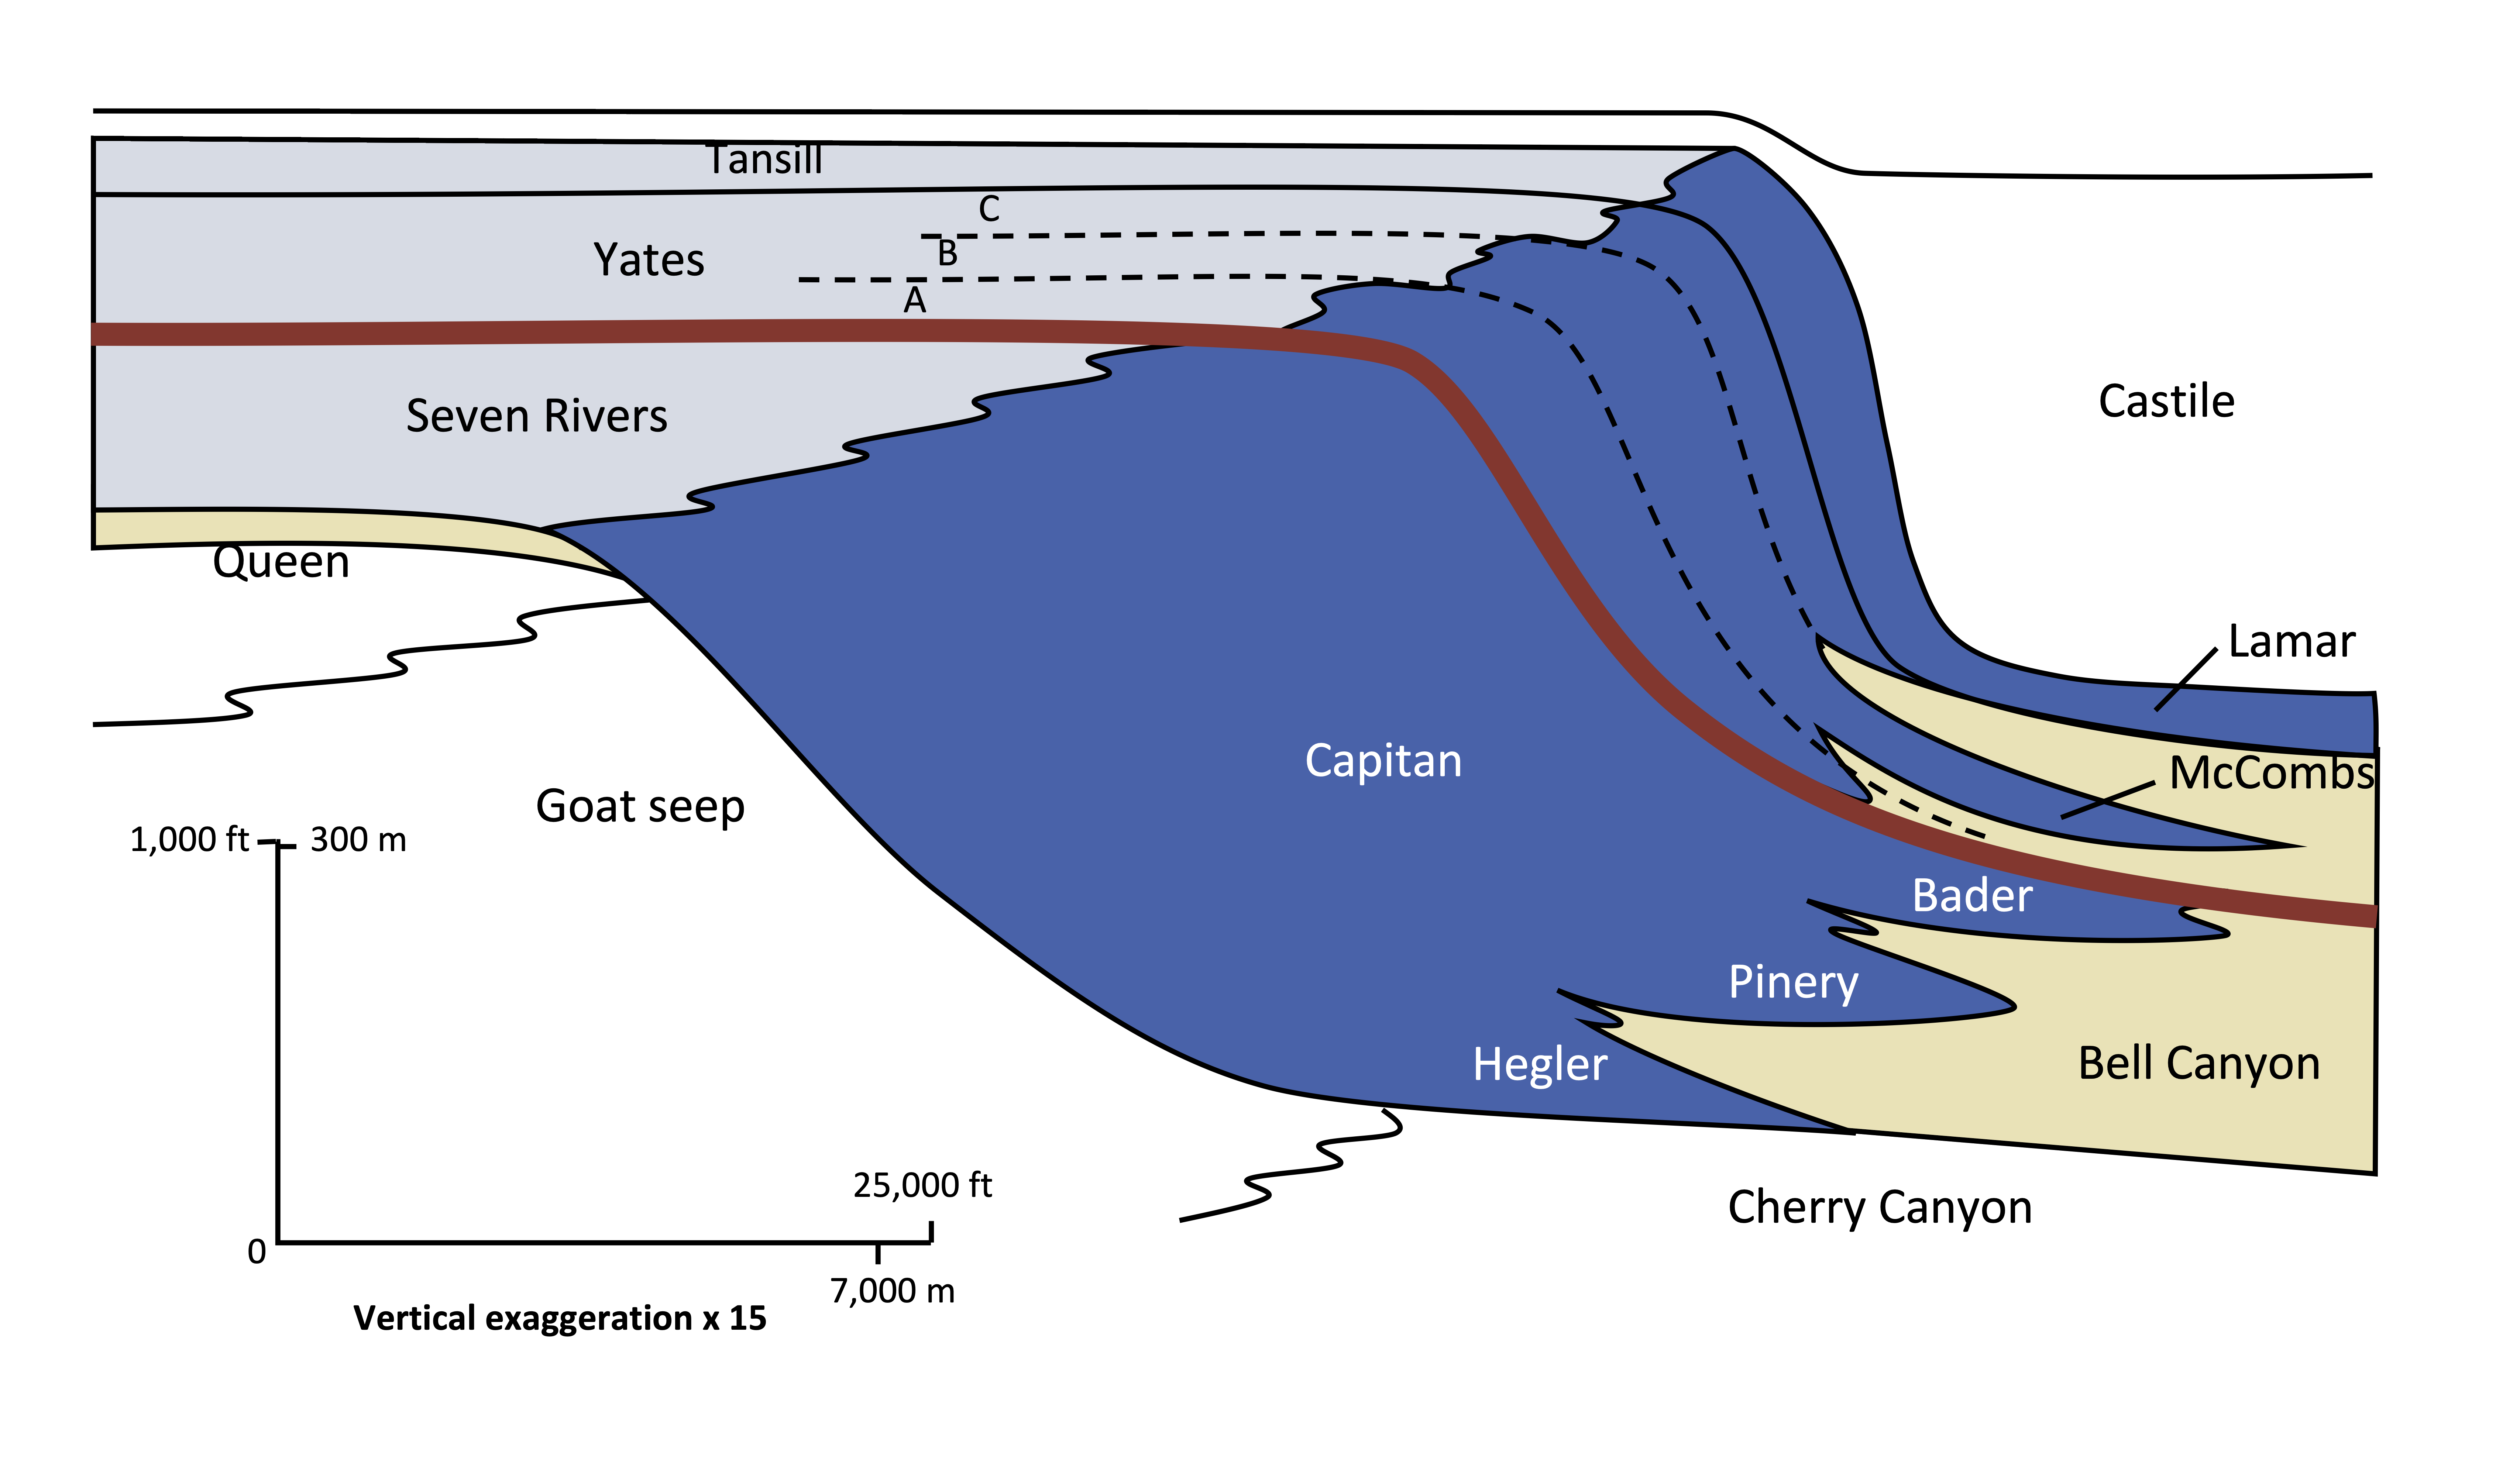 Cross-section showing horizontal strata on the left which then steeply slopes toward the right and becomes flat again; three different rock strata with unique lithology are being deposited at the same time in nearby geographic areas, noted by a thick red line that goes through the layers.